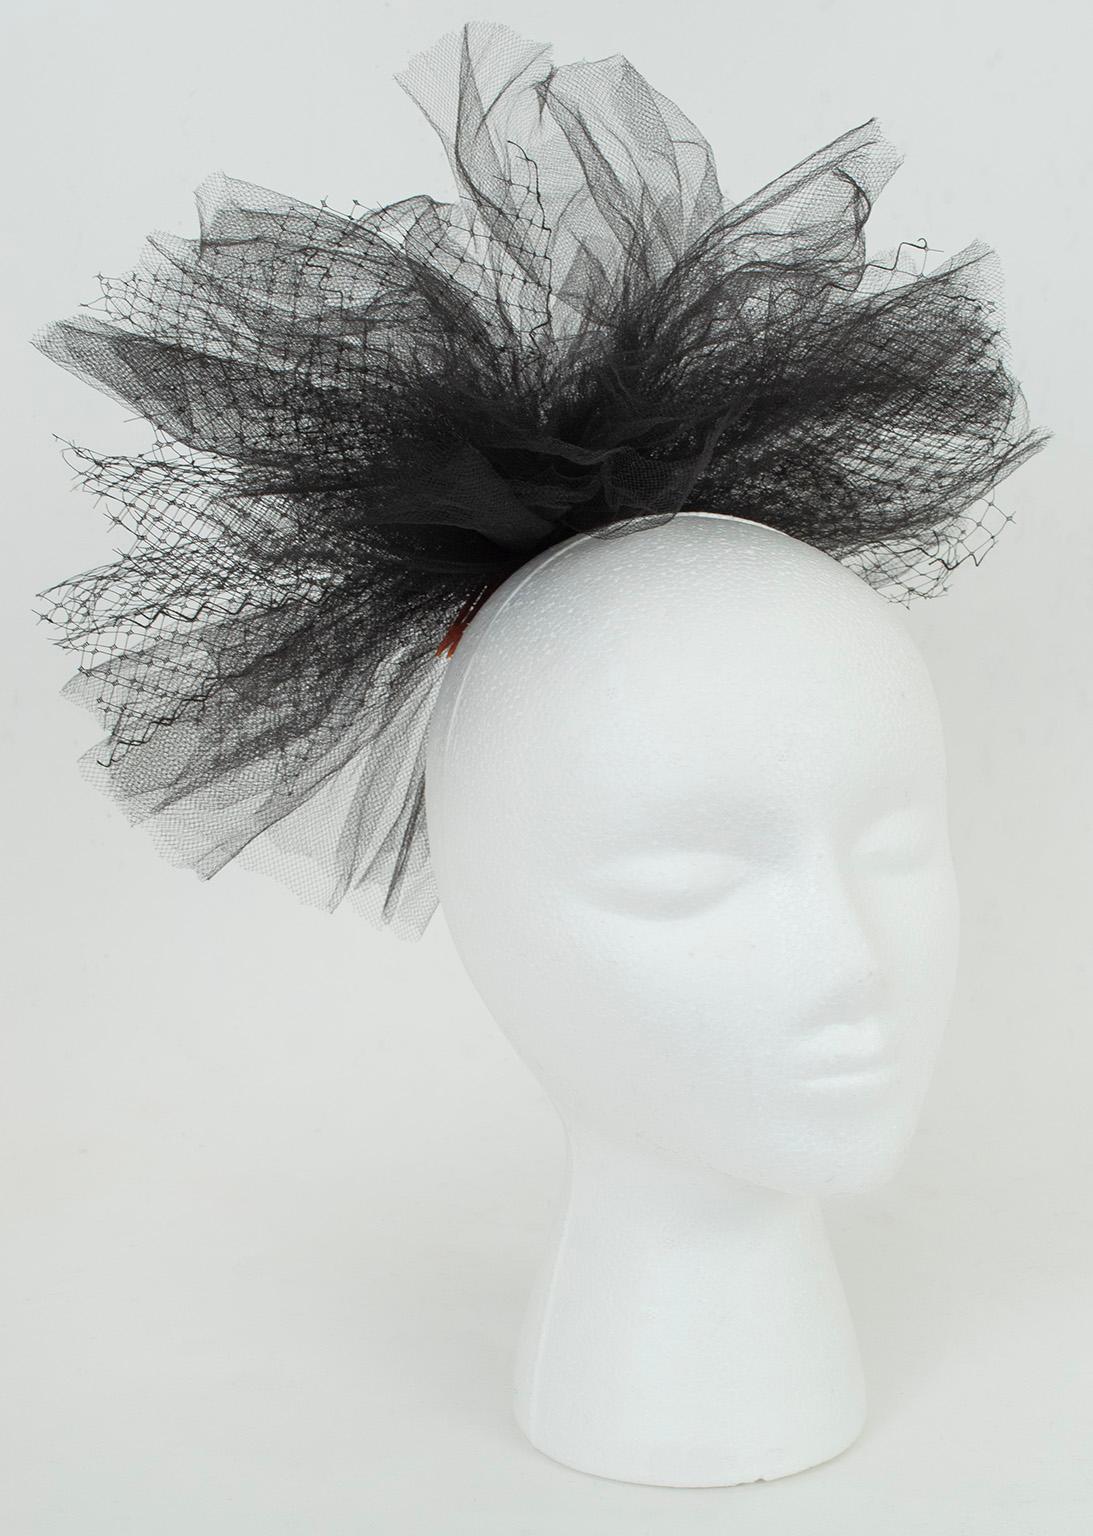 The weightlessness of a fascinator with all the pomp of a cocktail hat, this extraordinary hair piece forms an enormous flower via gathers of black tulle and net. A statement accessory larger than the head that wears it, which may also be pinned to